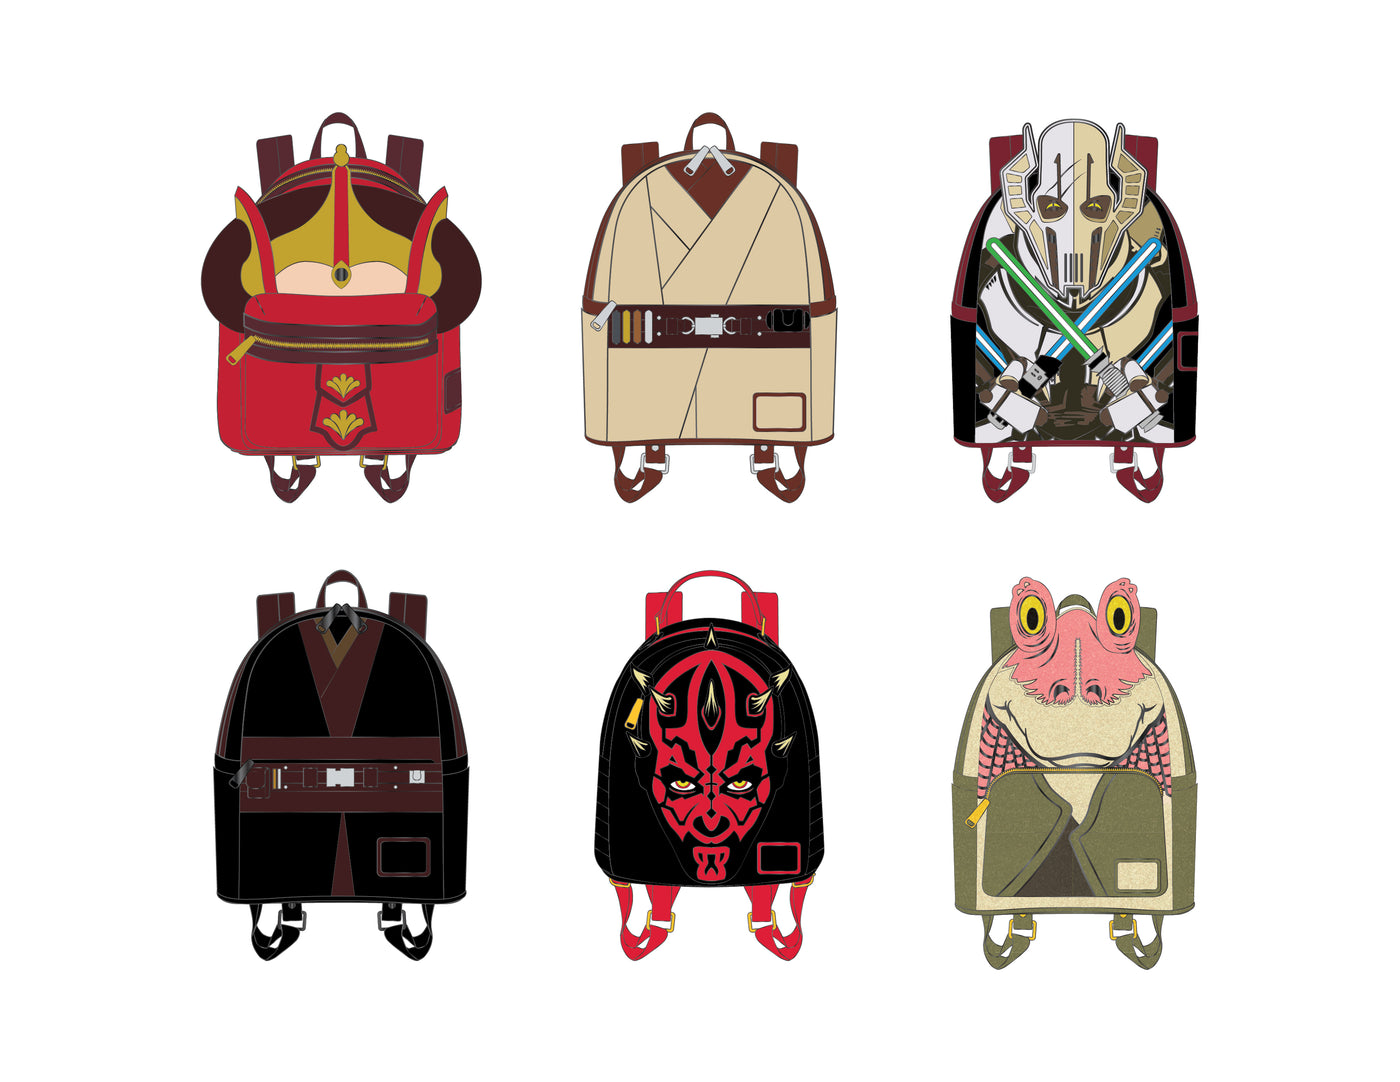 Star Wars Prequel Trilogy Characters Blind Box Pin